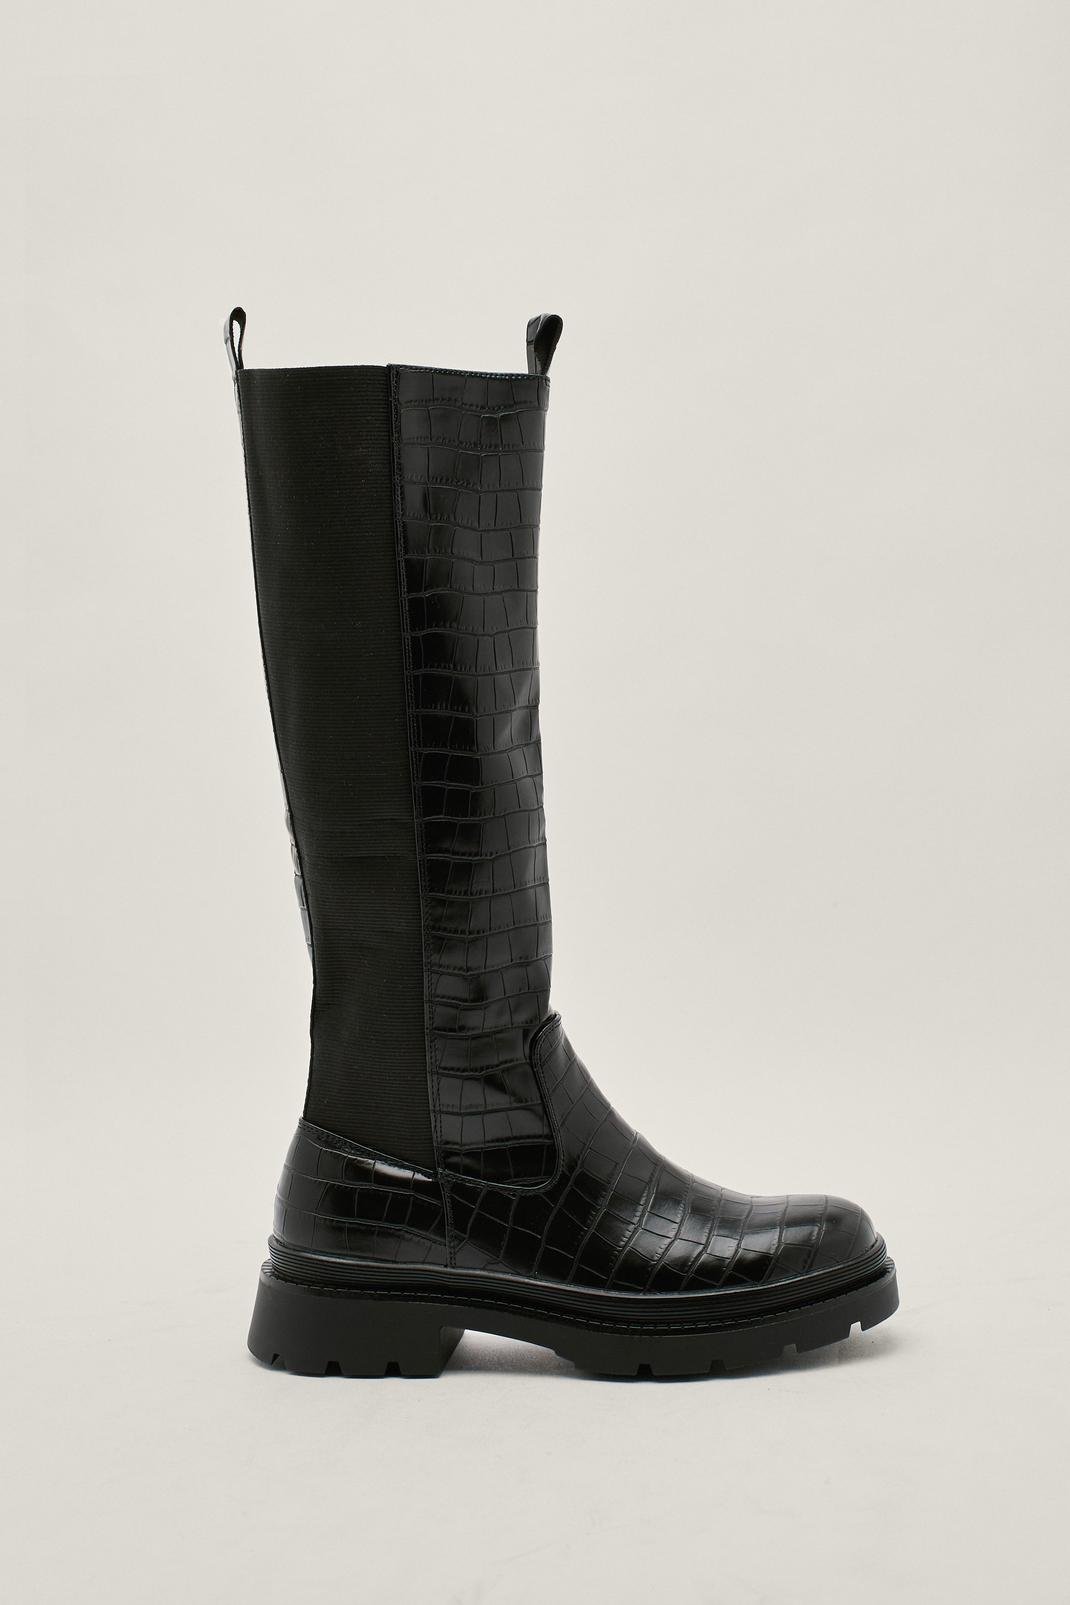 Black Croc Faux Leather Calf High Boots image number 1